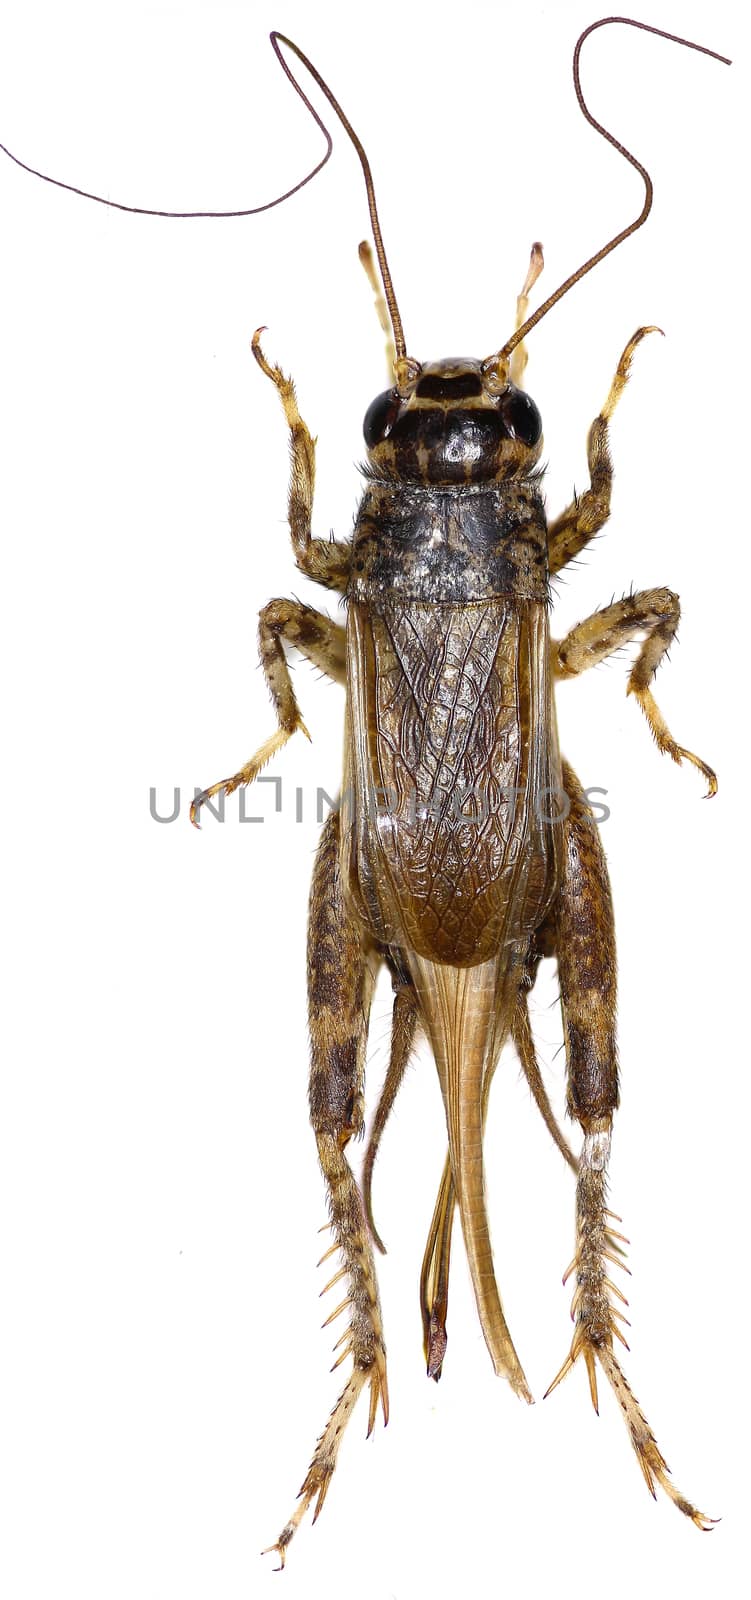 Cricket (insect) on white Background  -  Eumodicogryllus bordigalensis (Latreille, 1804) by gstalker